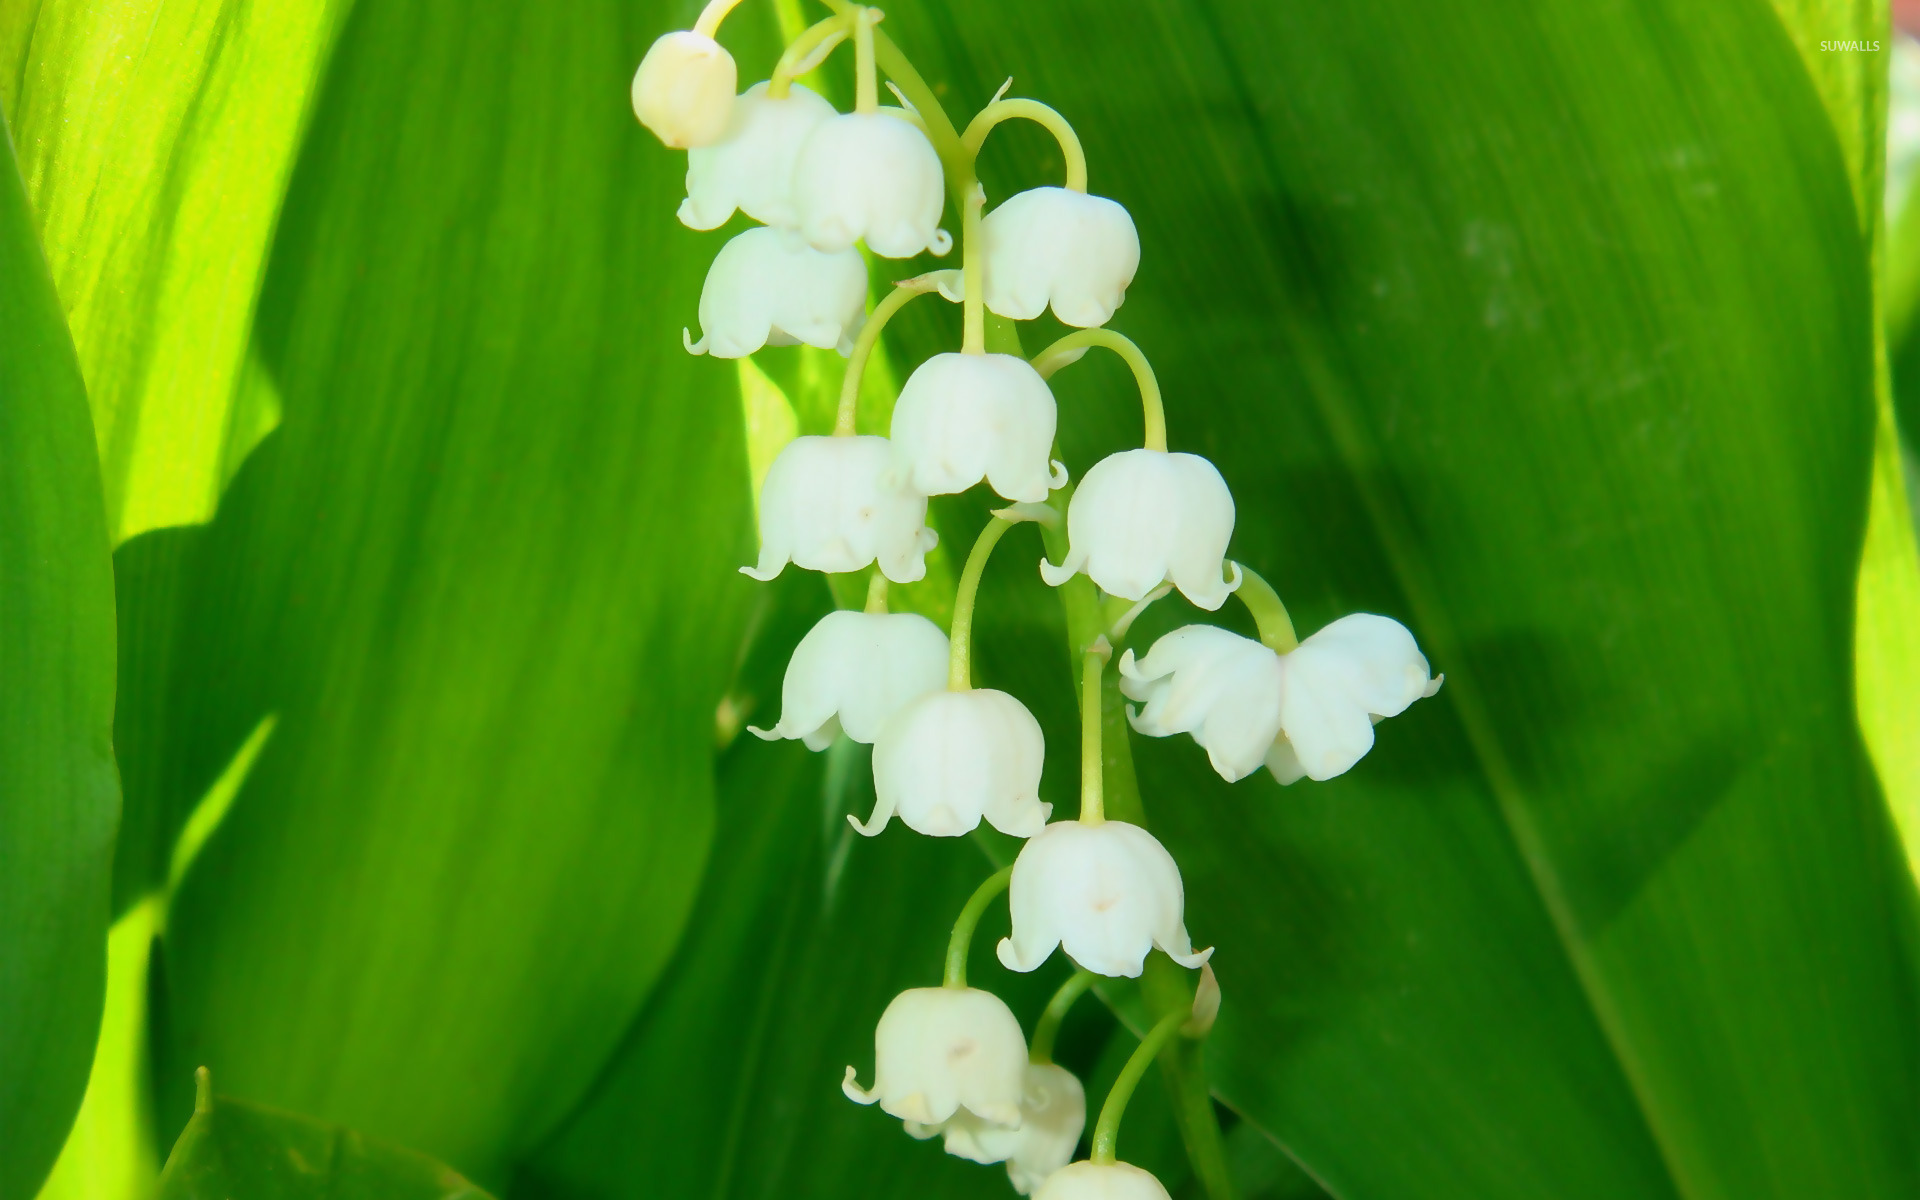 Phone Lily Of The Valley - HD Wallpaper 